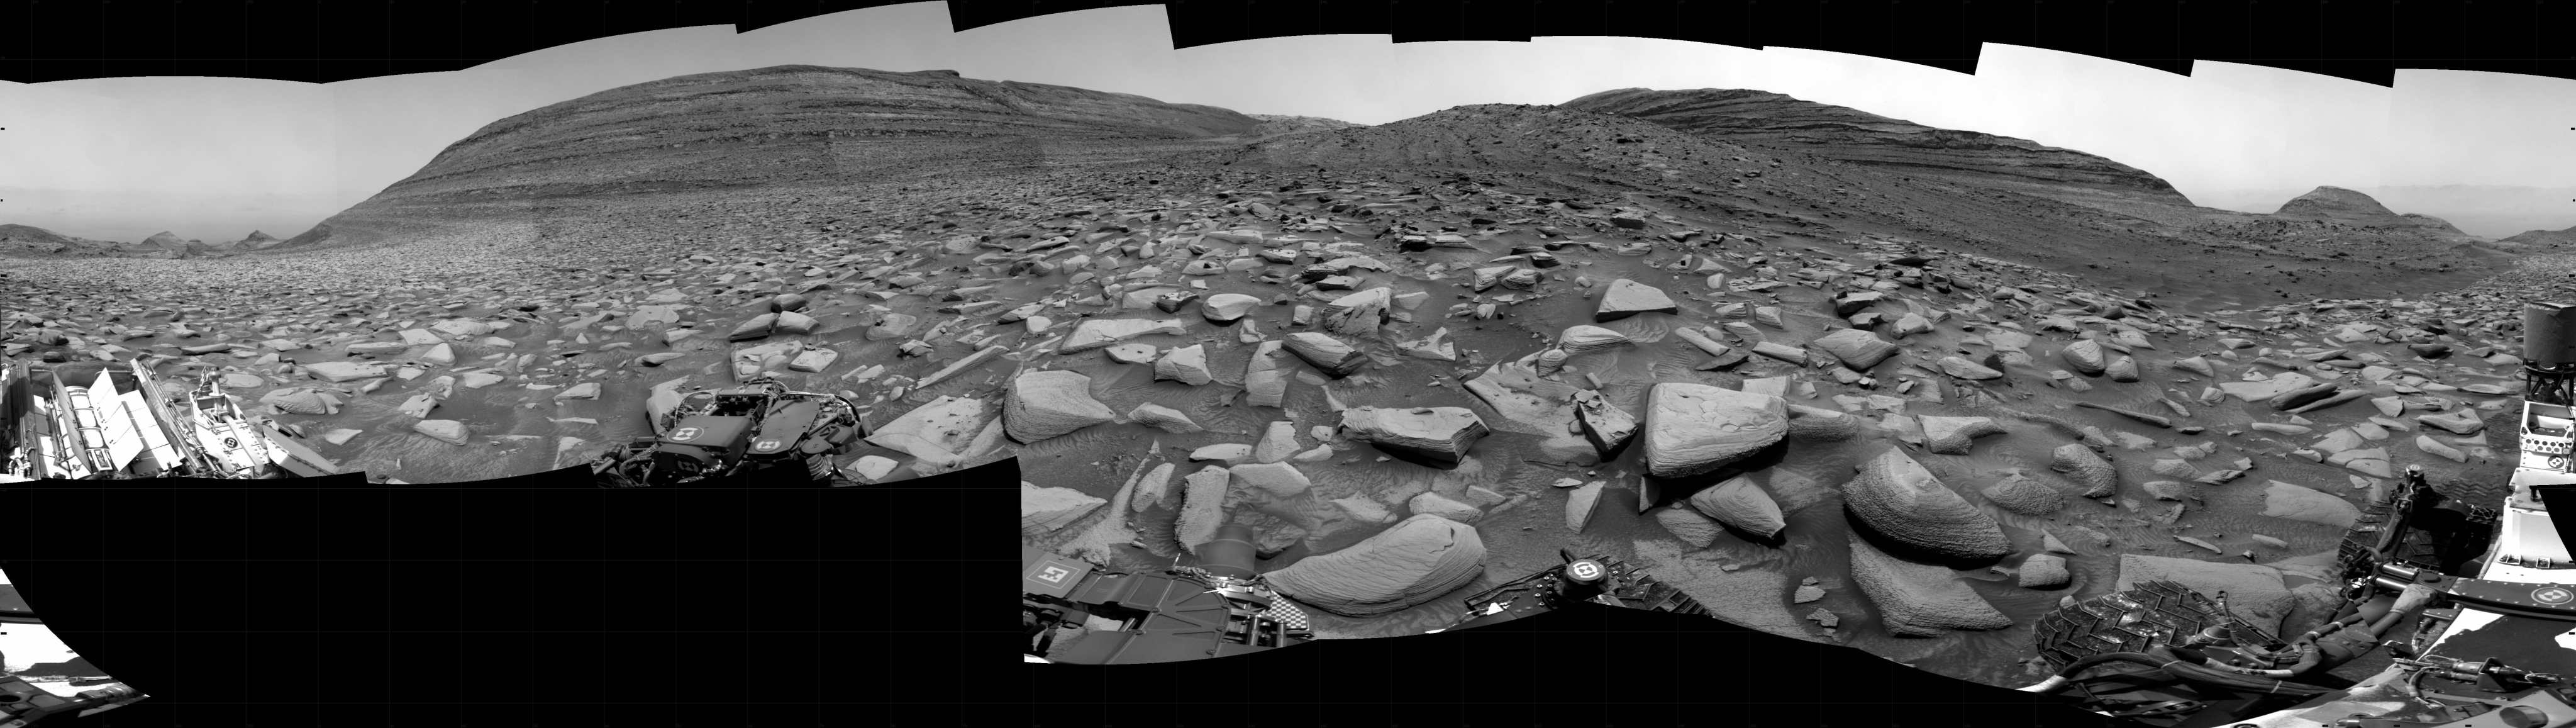 Curiosity took the images on April 22, 2024, Sol 4162 of the Mars Science Laboratory mission at drive 2836, site number 106. The local mean solar time for the image exposures was from 1 PM to 12 PM.